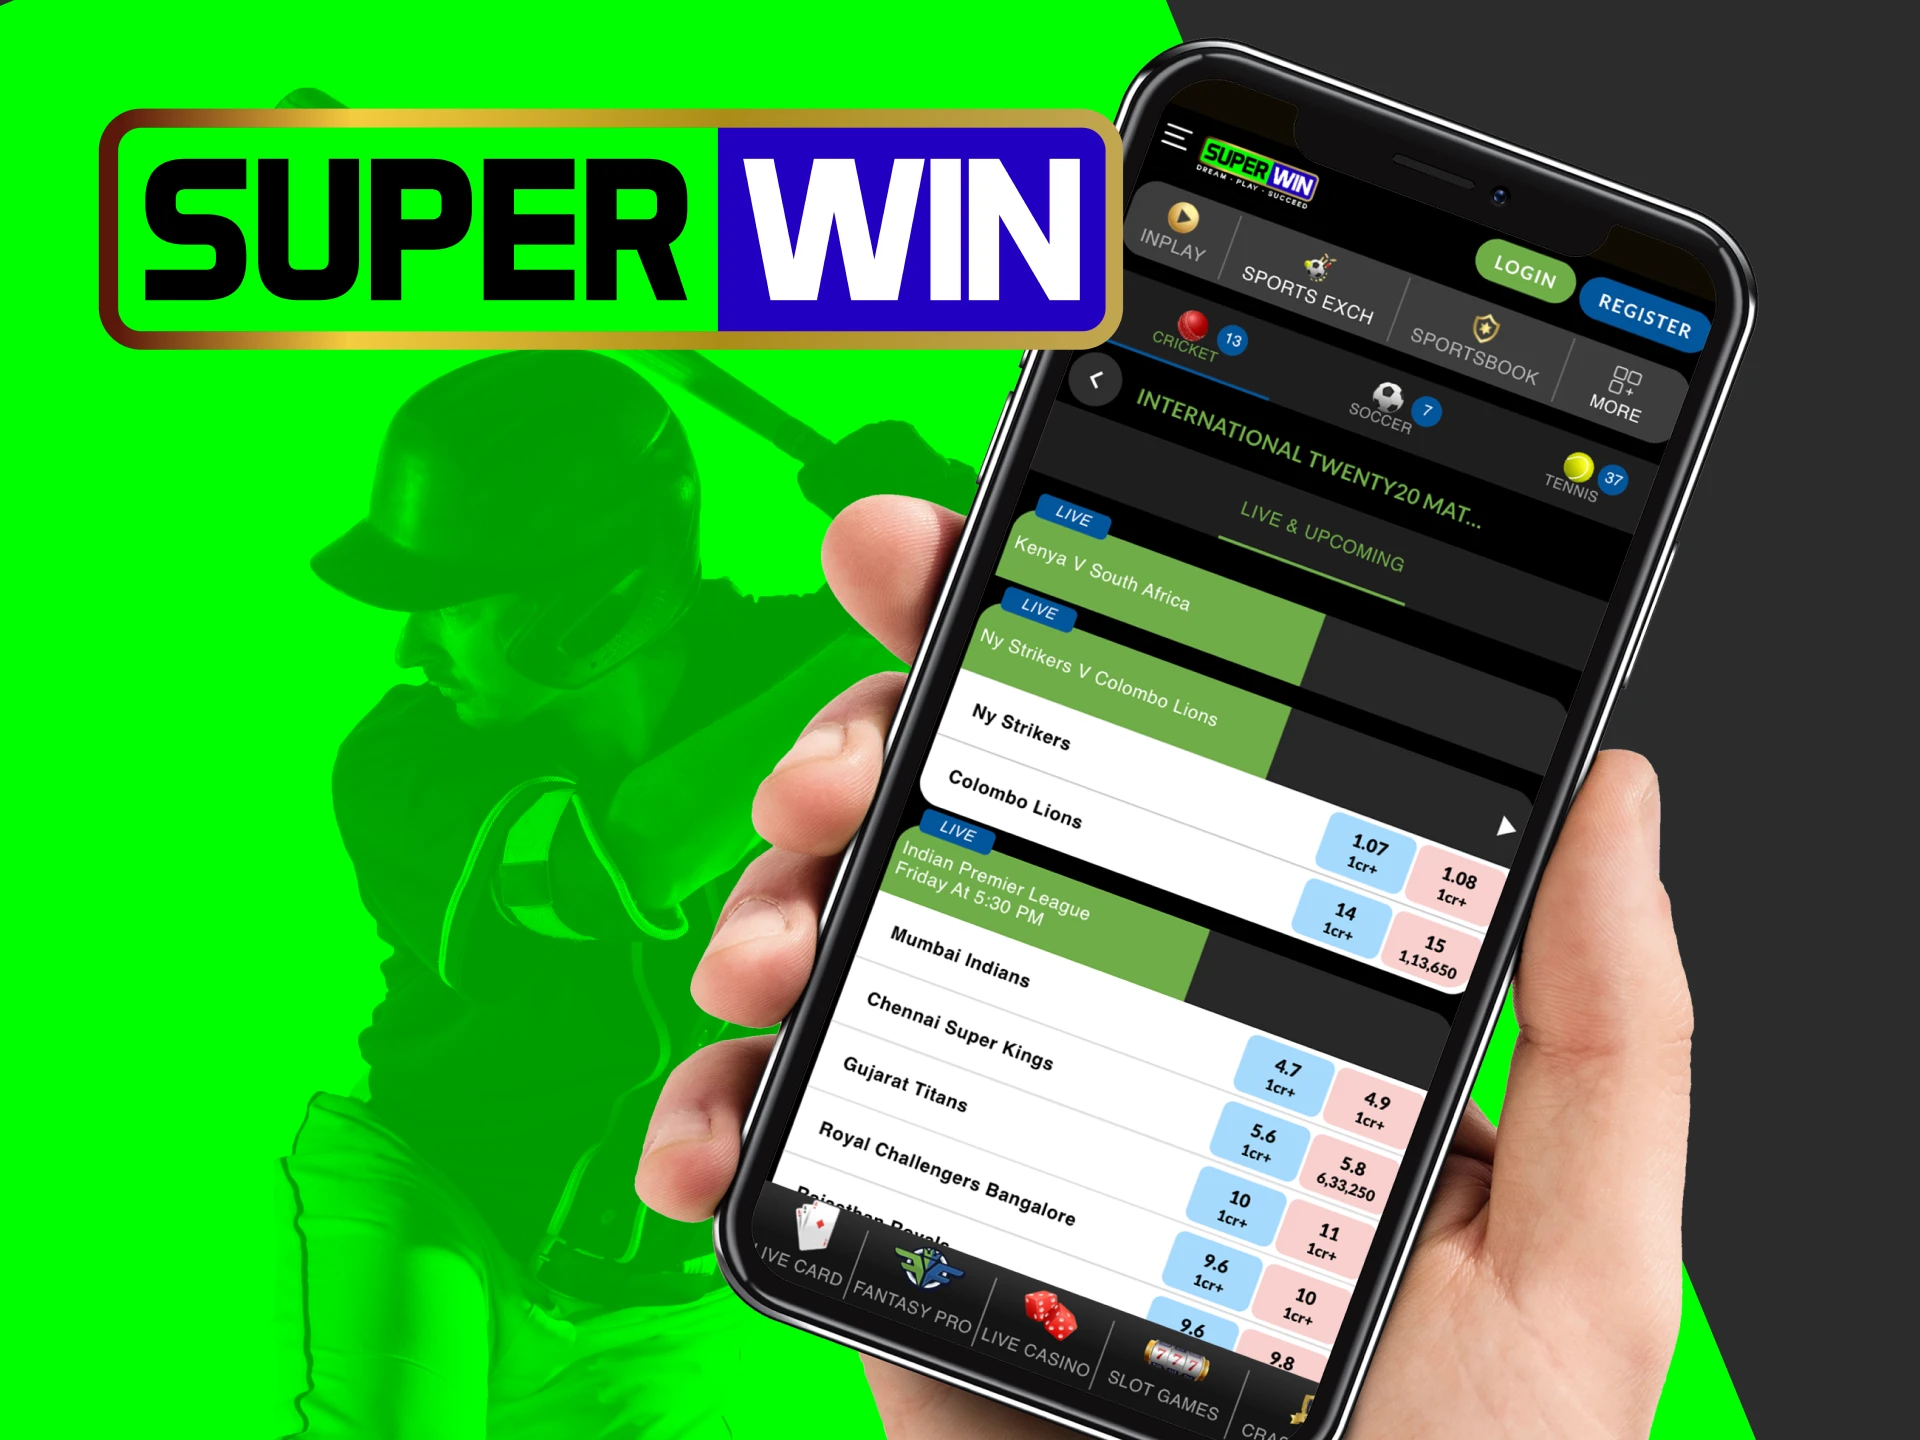 What do I need to do to bet on IPL matches at SuperWin online casino from my phone.